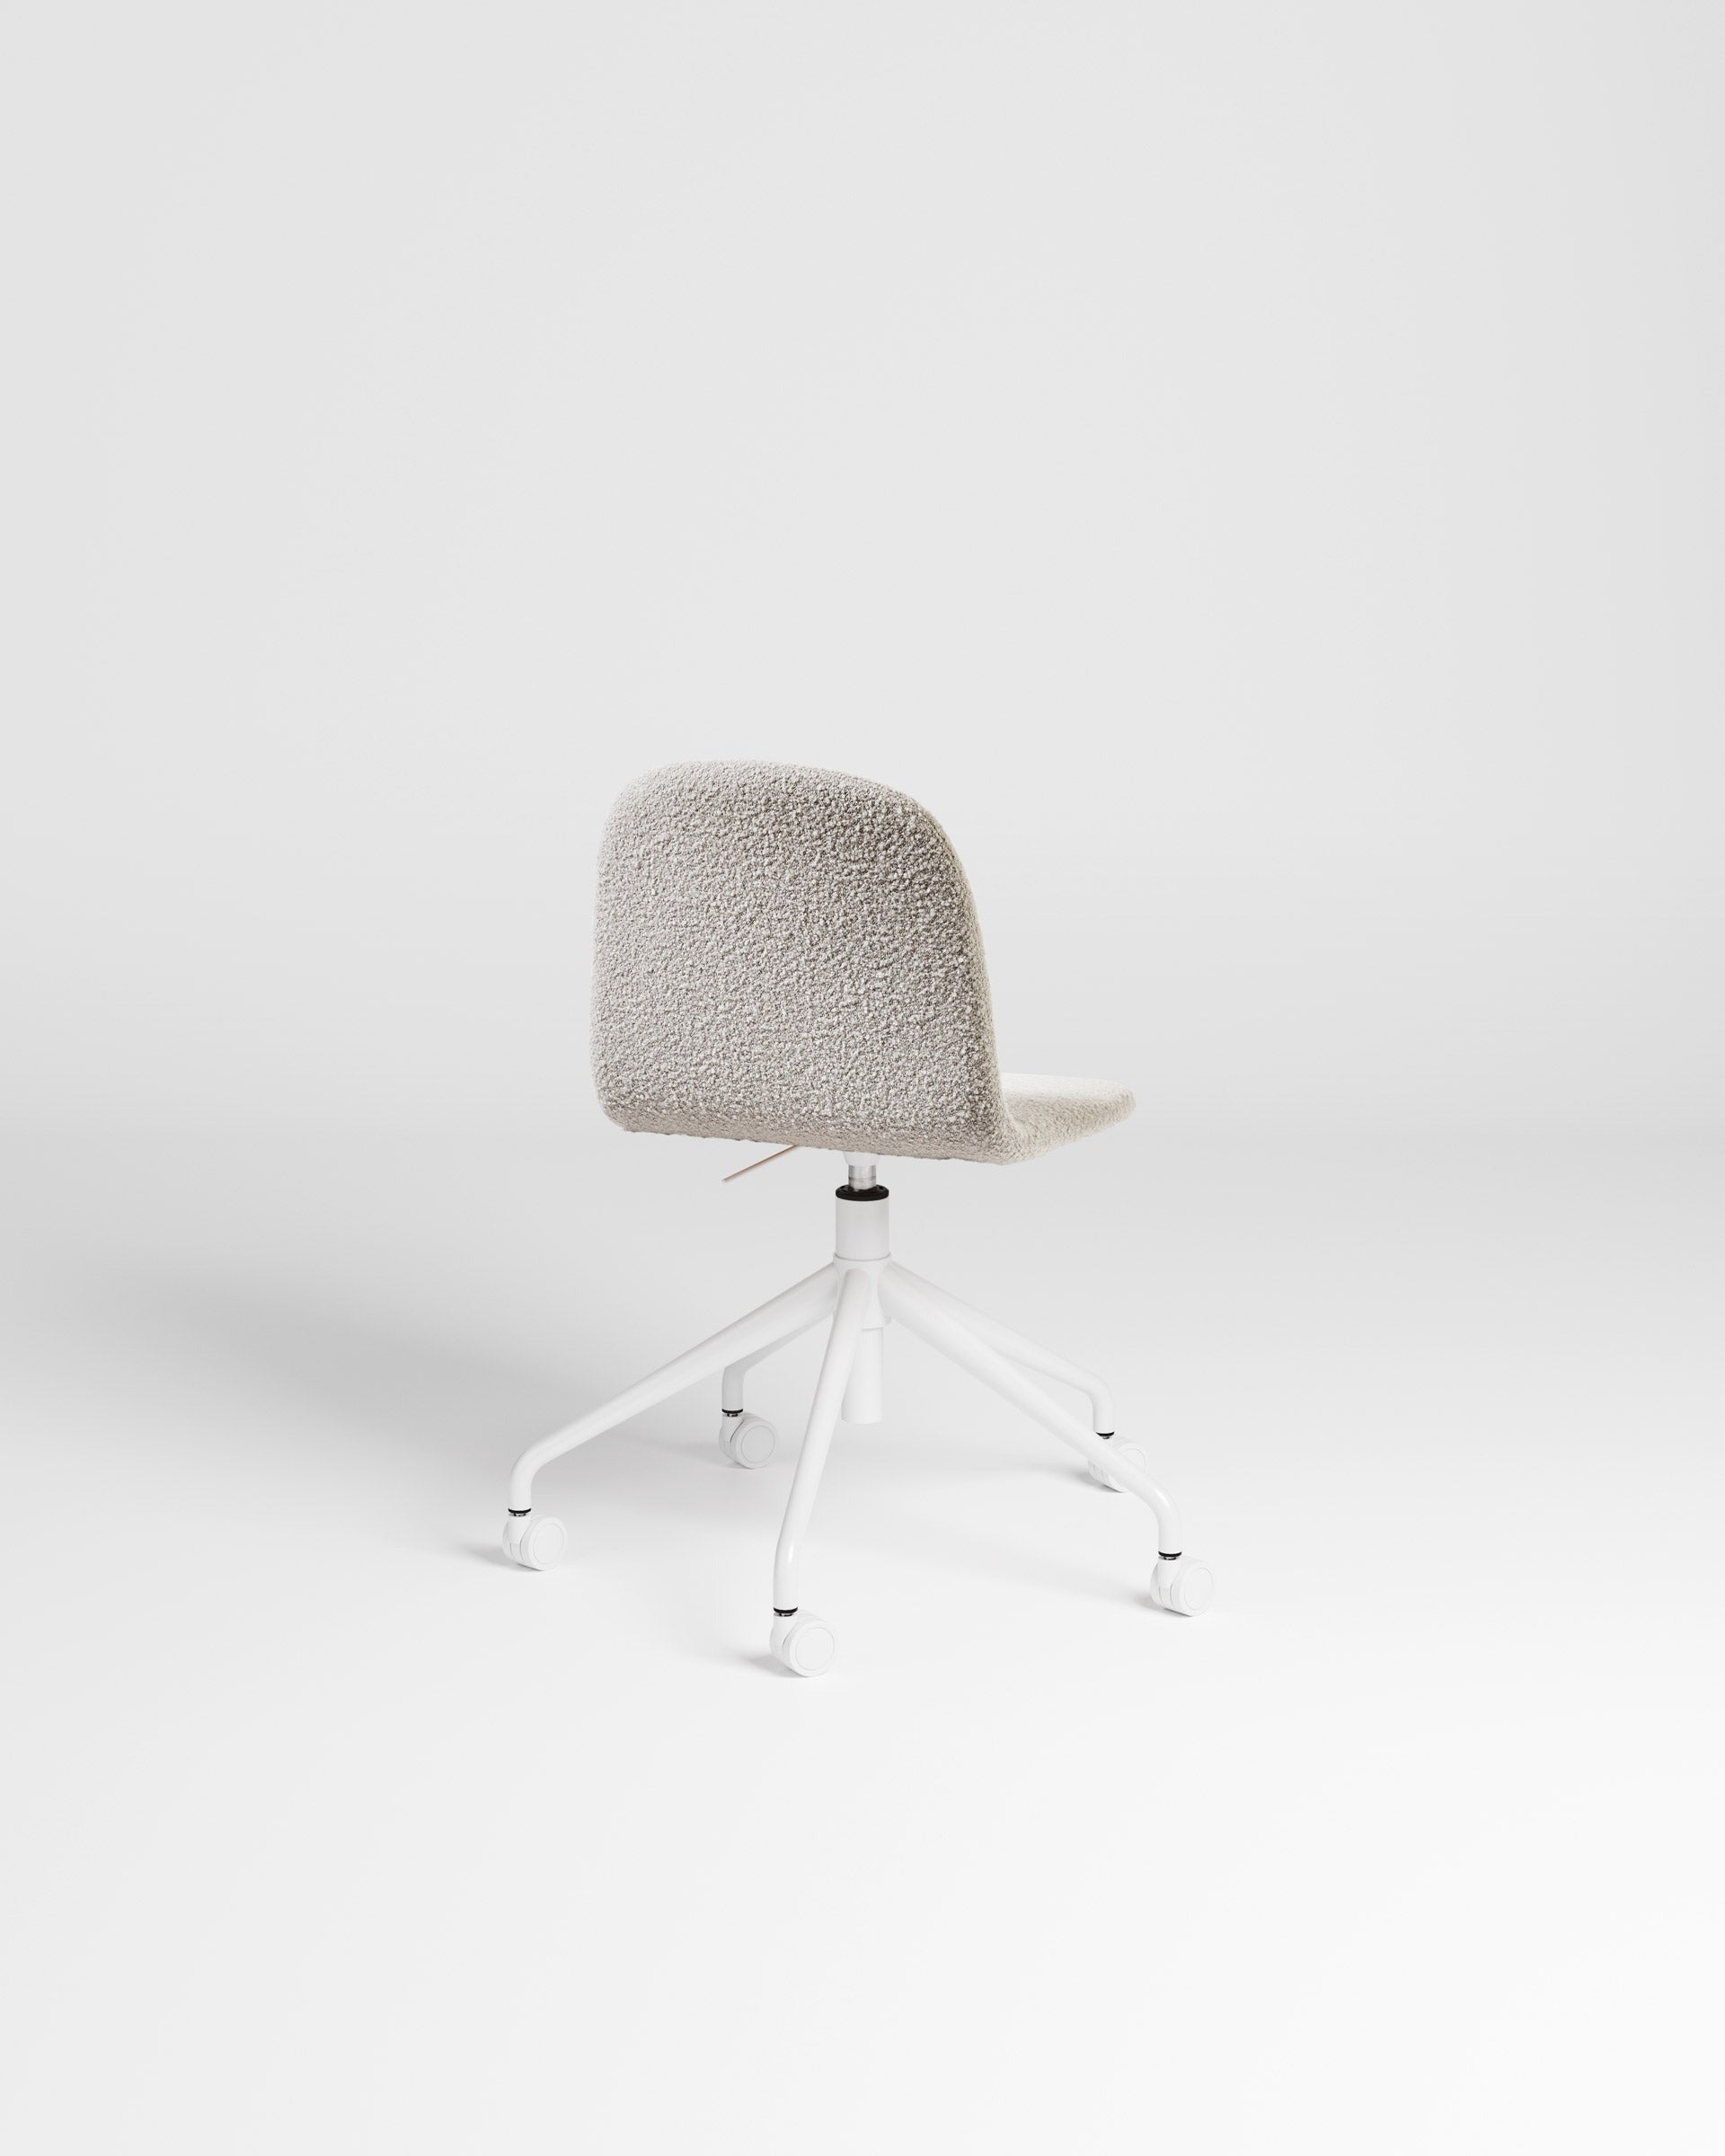 Potato Chair | Swivel Gaslift & Upholstered Dining Office Chair with Handle | GibsonKarlo | DesignByThem